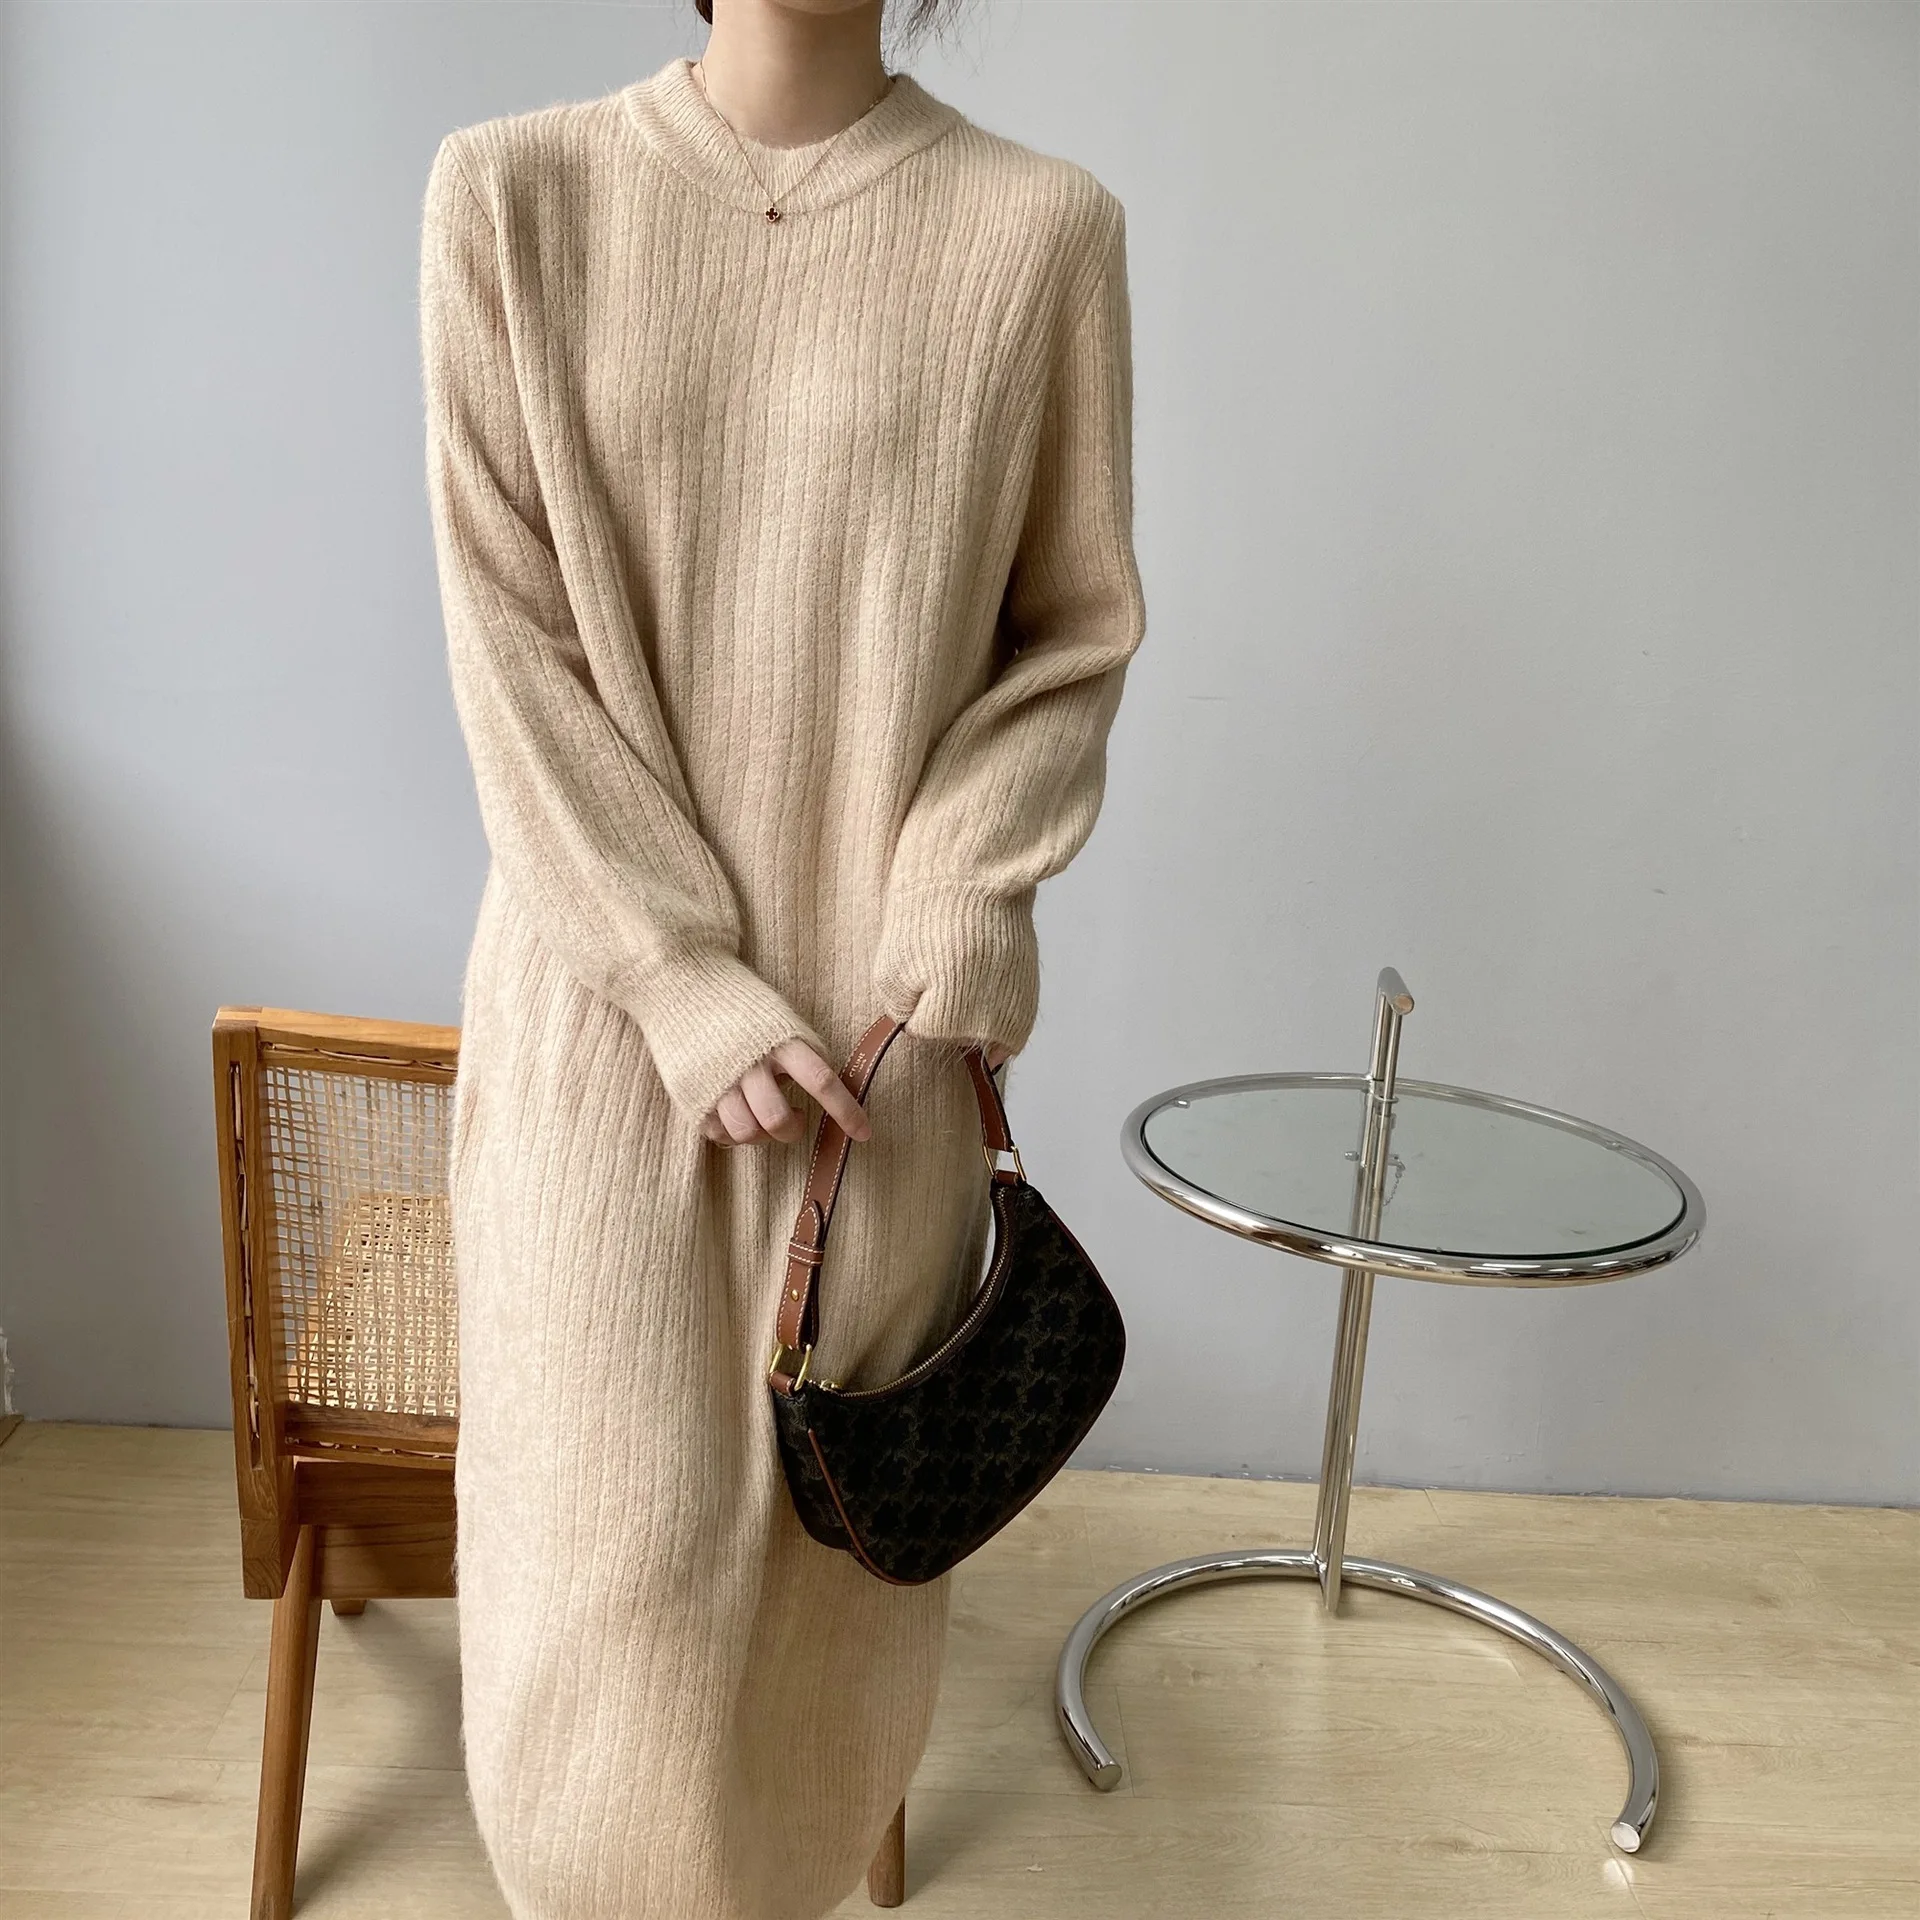 2021 Autumn Women O-Neck Sweater Loose Style Knitted Fashion Oversize Long Sweater Casual Women Pullovers Pull Femme black cardigan